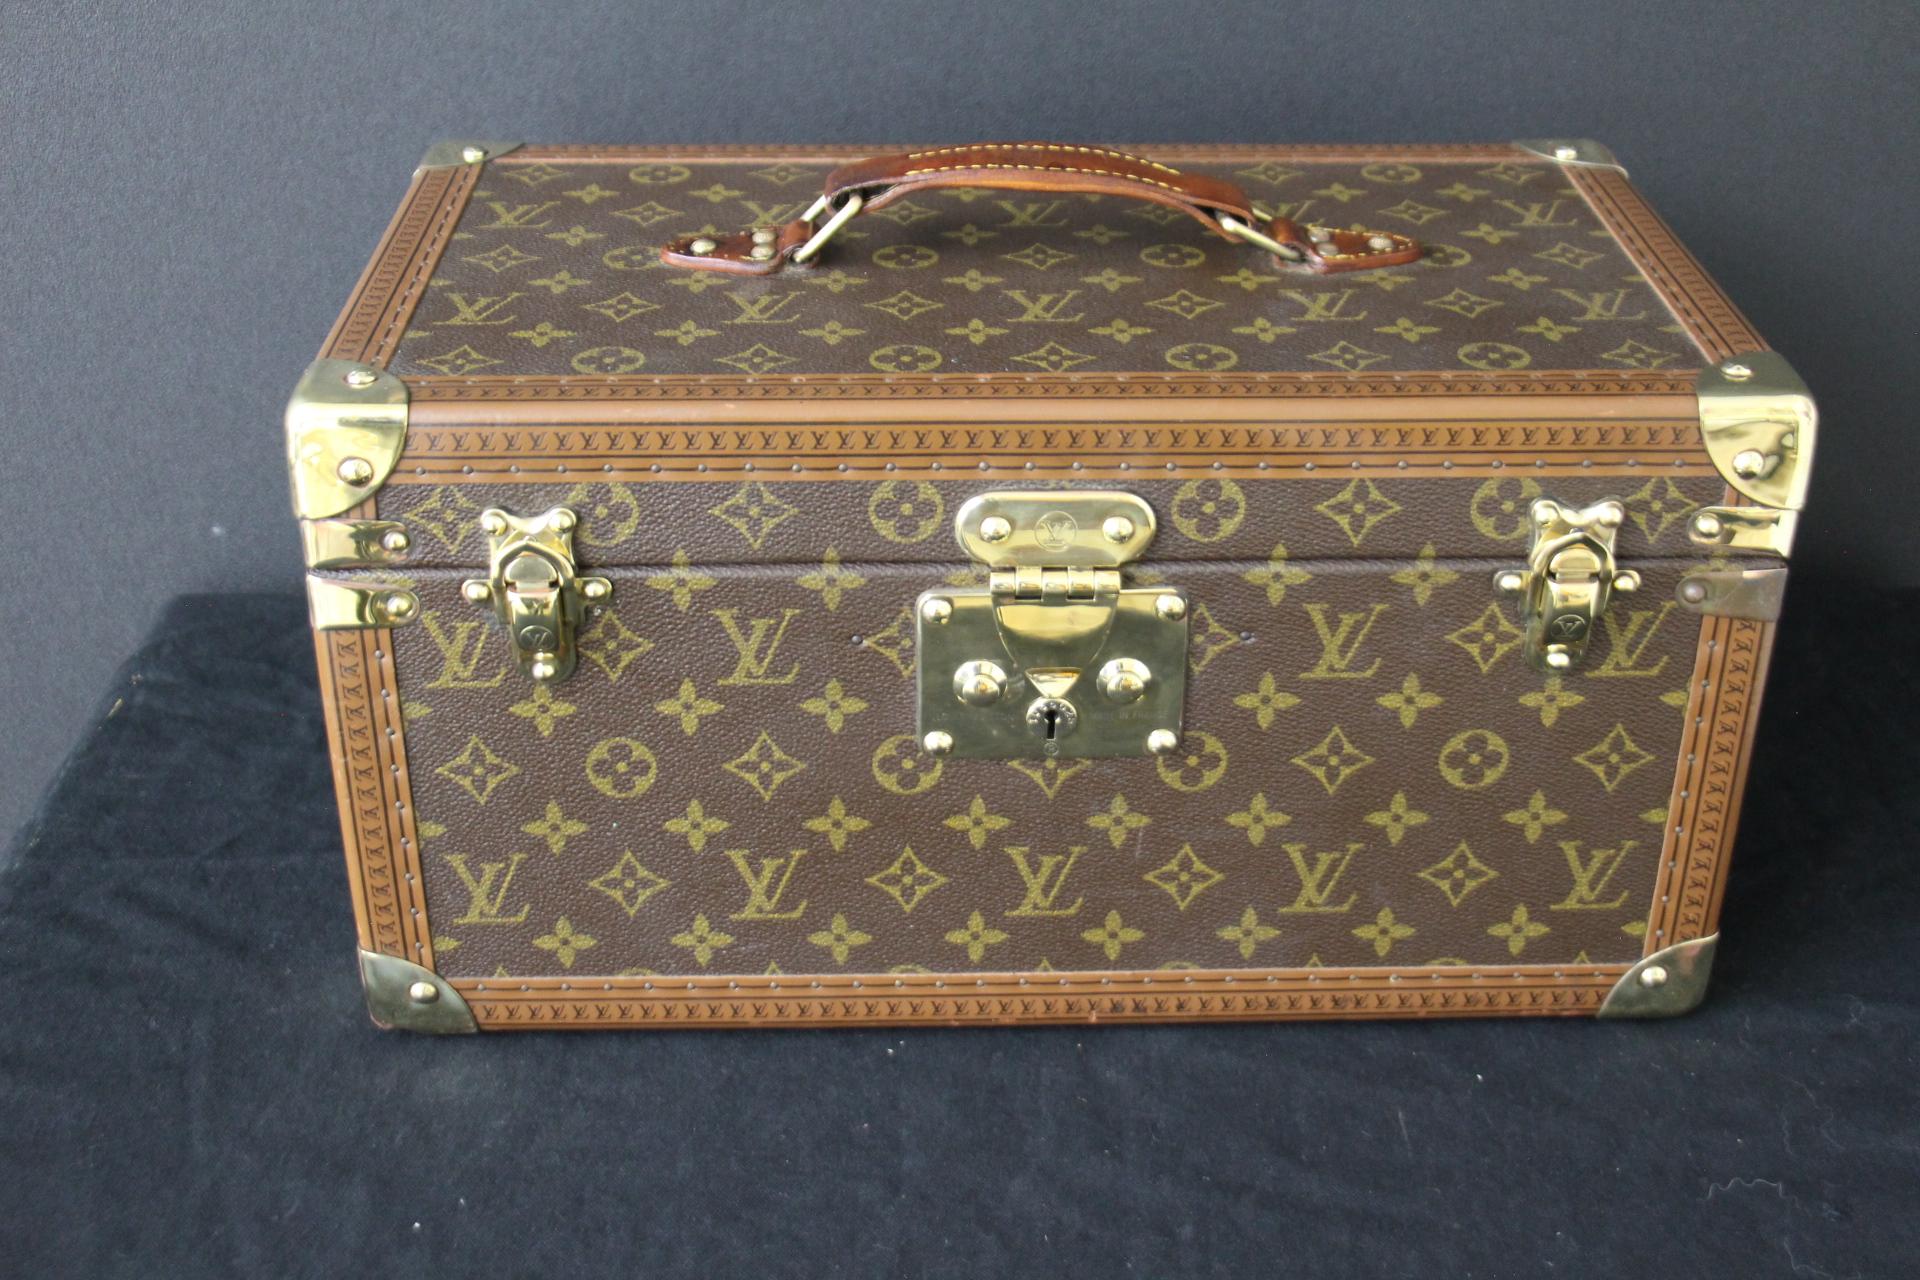 This Louis Vuitton train case features monogram canvas and all brass fittings.
All studs are marked Louis Vuitton. All its trim is printed with Louis Vuitton monogram.
Its interior is in beige coated canvas and it features 2 rows of adjustable